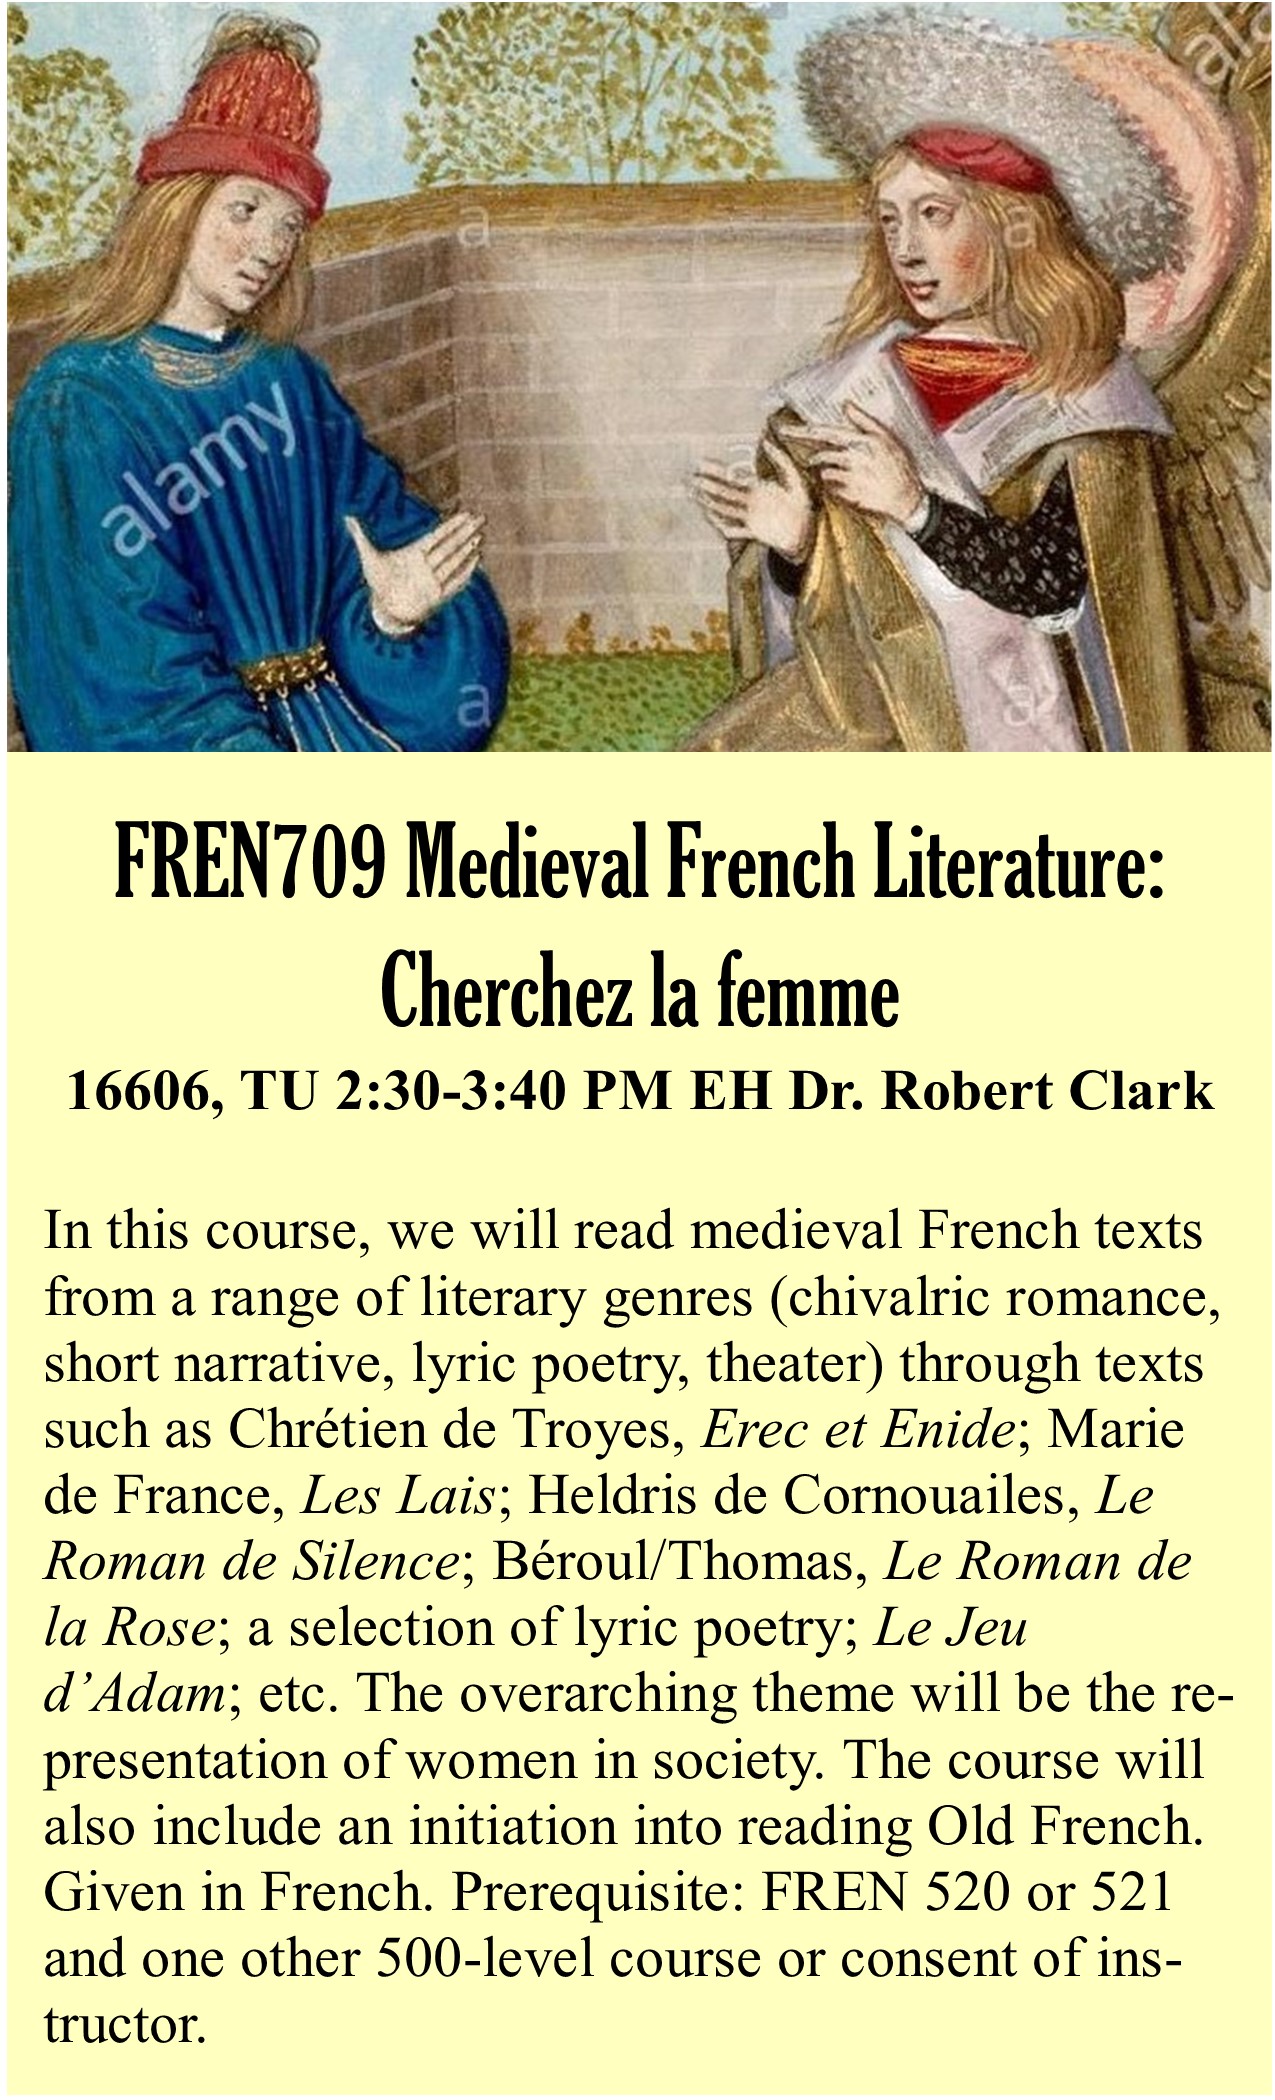 FREN 709: French Medieval Literature: Cherchez la femme, Dr. Robert Clark (rclark@ksu.edu) (A: 16606, TU 2:30-3:45 PM, EH 001). In this course, we will read medieval French texts from a range of literary genres (chivalric romance, short narrative, lyric poetry, theater) through texts such as Chrétien de Troyes, Erec et Enide; Marie de France, Les Lais; Heldris de Cornouailes, Le Roman de Silence; Béroul/Thomas, Le Roman de la Rose; a selection of lyric poetry; Le Jeu d’Adam; etc. The overarching theme will be the representation of women in society. The course will also include an initiation into reading Old French. Given in French. Prerequisite: FREN 520 or 521 and one other 500-level course or consent of instructor.